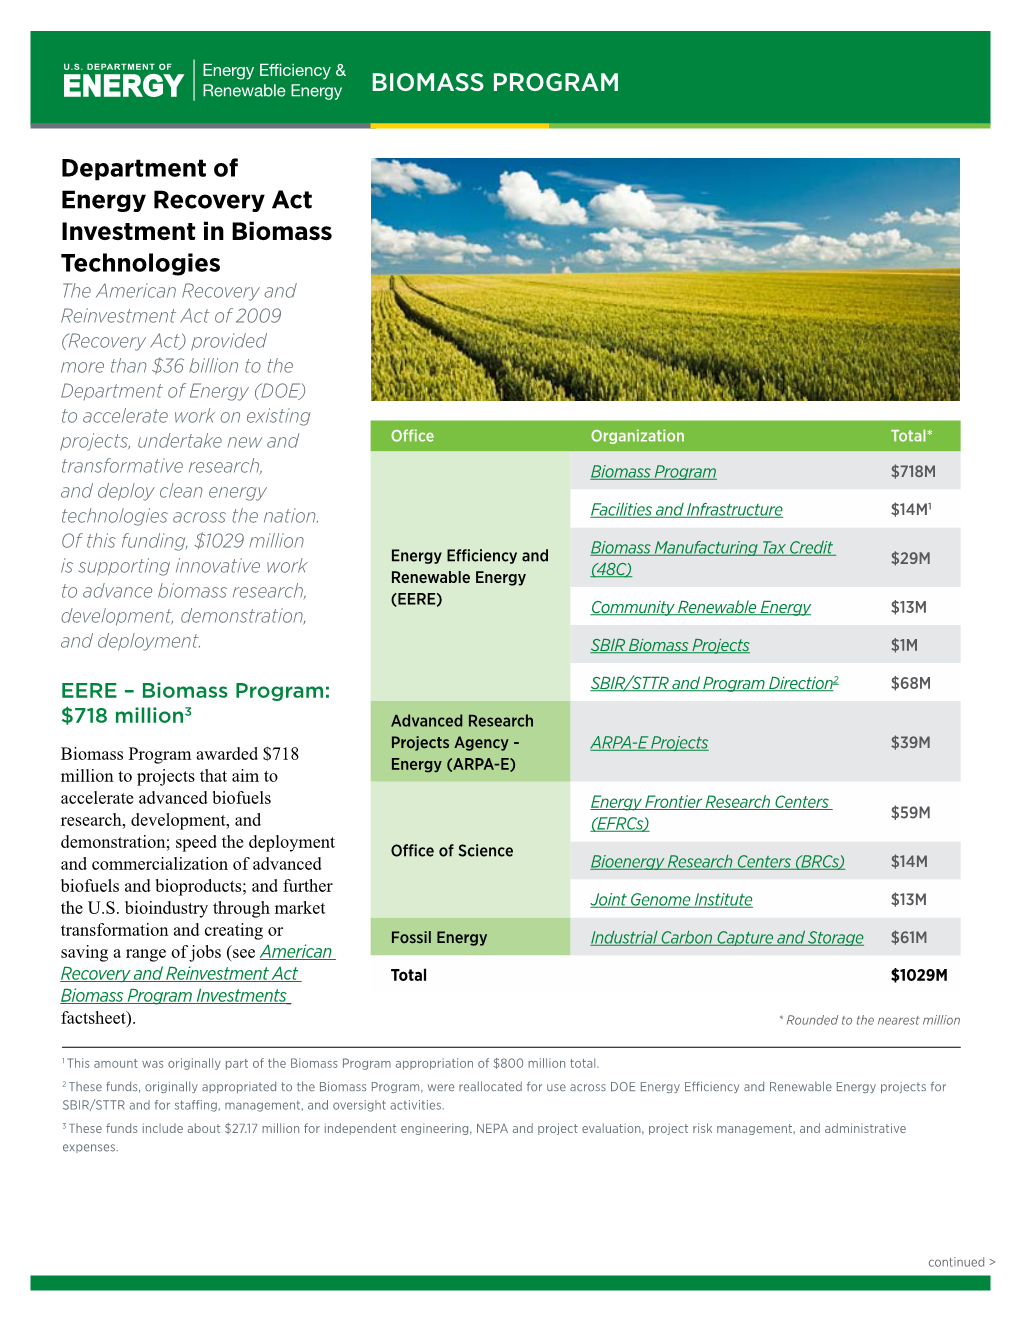 Department of Energy Recovery Act Investment in Biomass Technologies